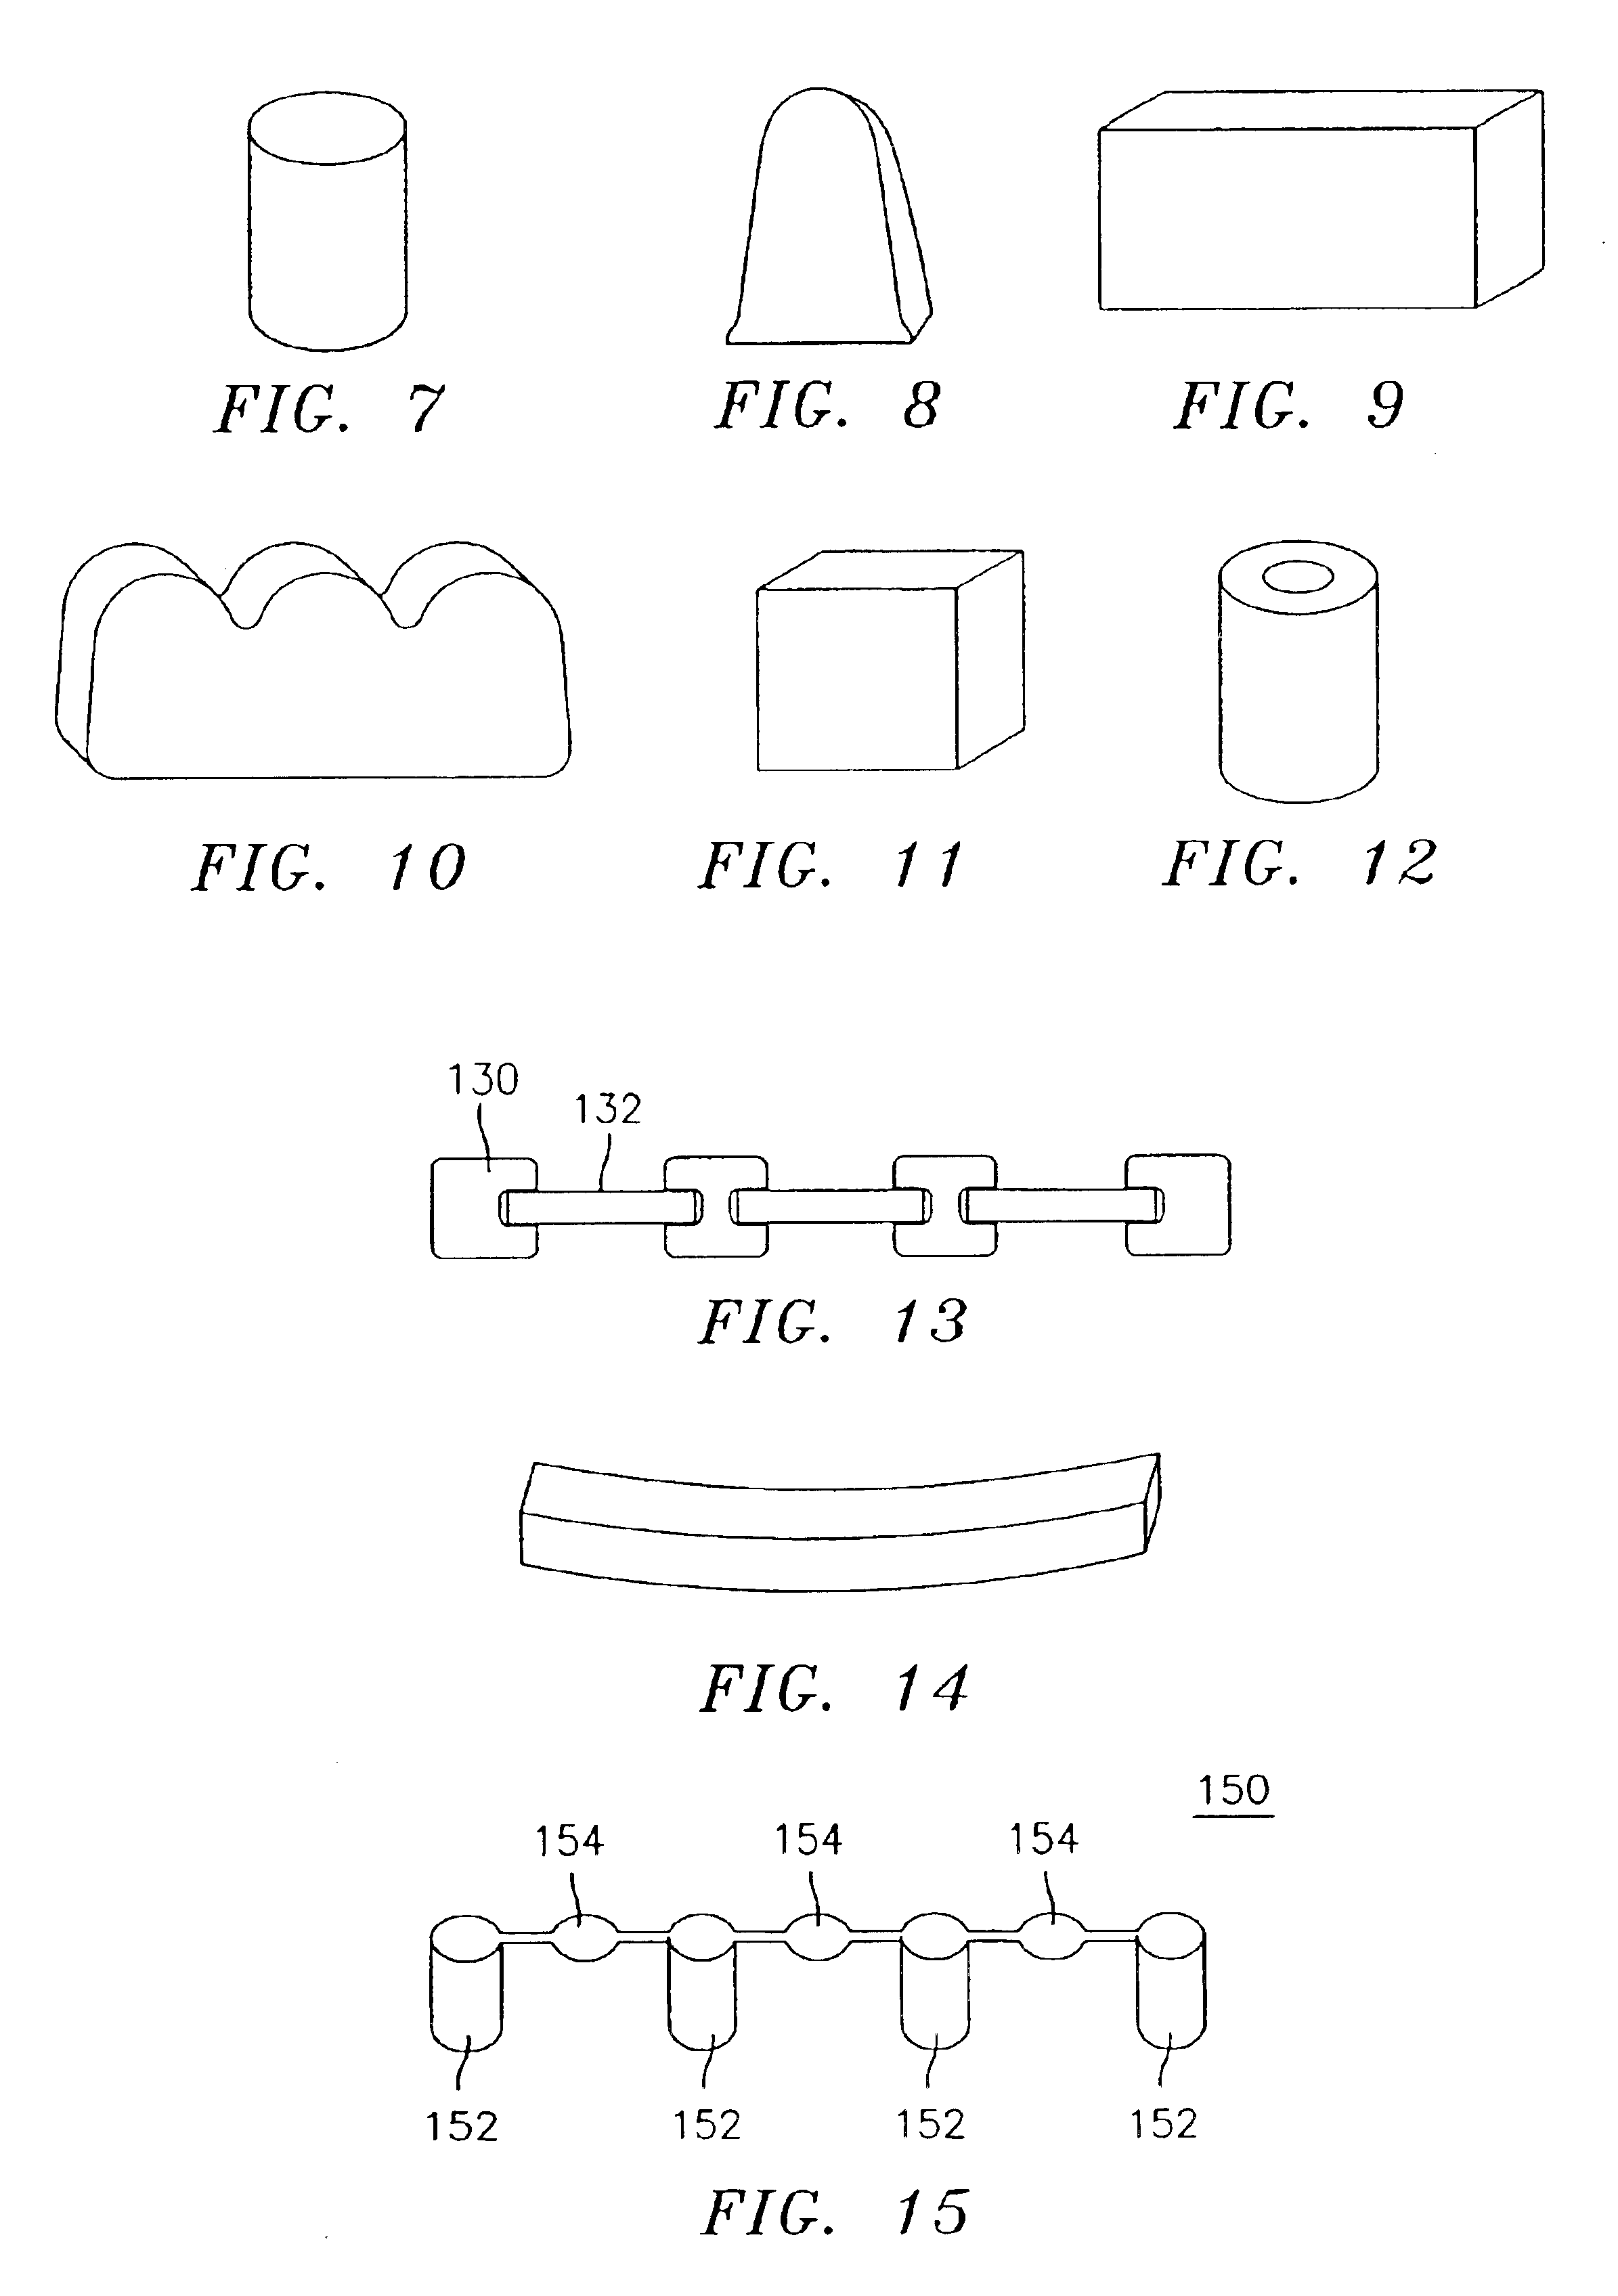 Prefabricated components for dental appliances